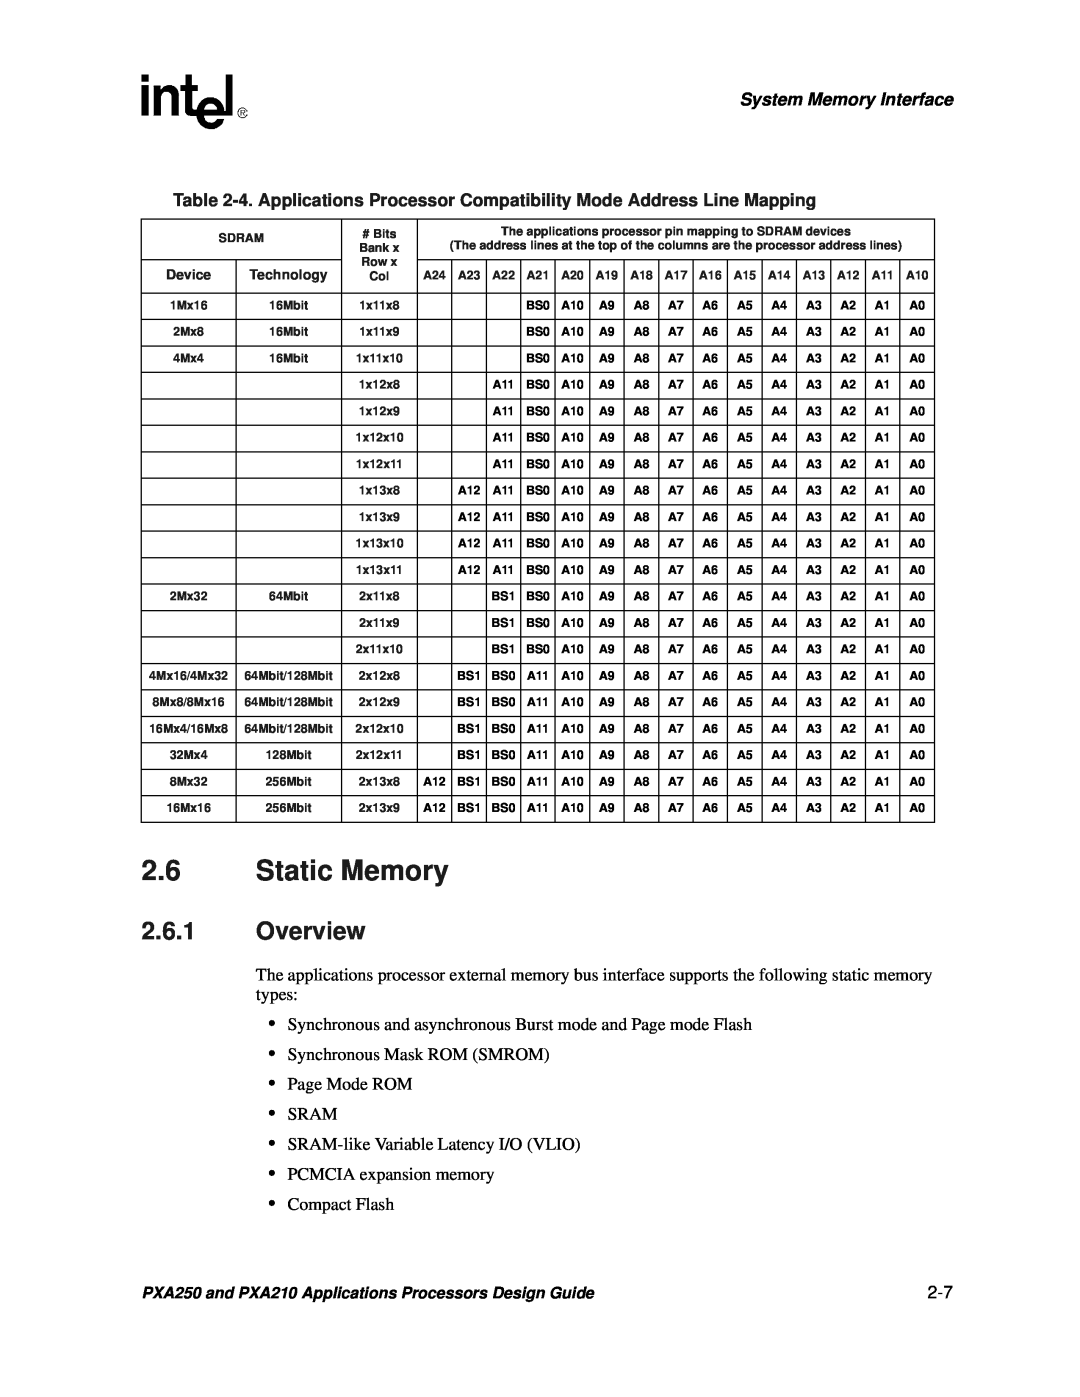 Intel PXA250 and PXA210 manual Static Memory, Overview, System Memory Interface 